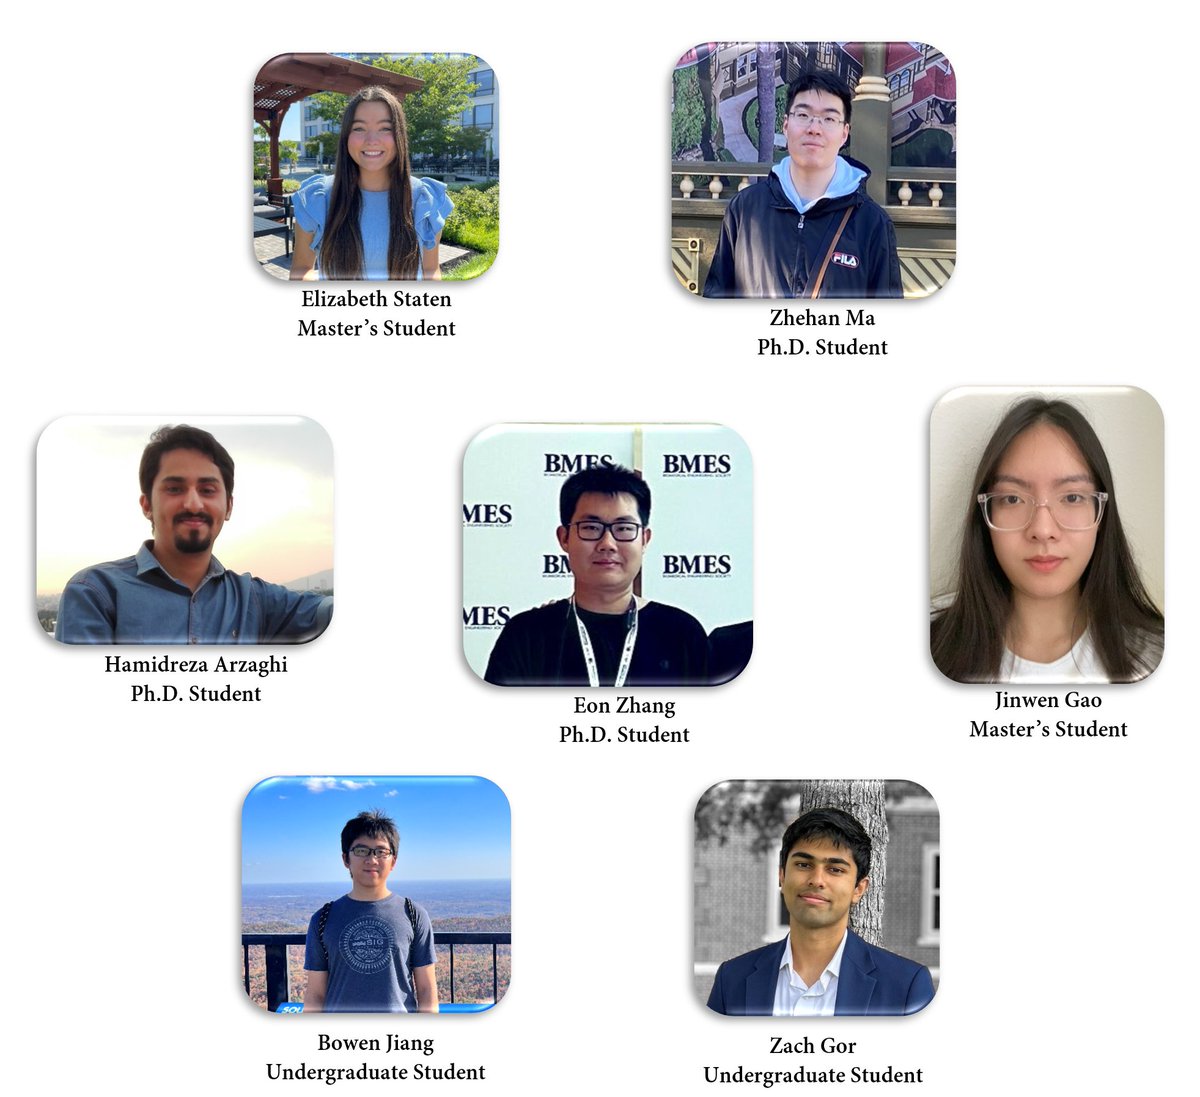 Innovating together: We are excited to welcome our new @MusahLab members -- a fantastic mix of passionate and outstanding #undergraduate, #master's, and #PhD students. Welcome aboard!